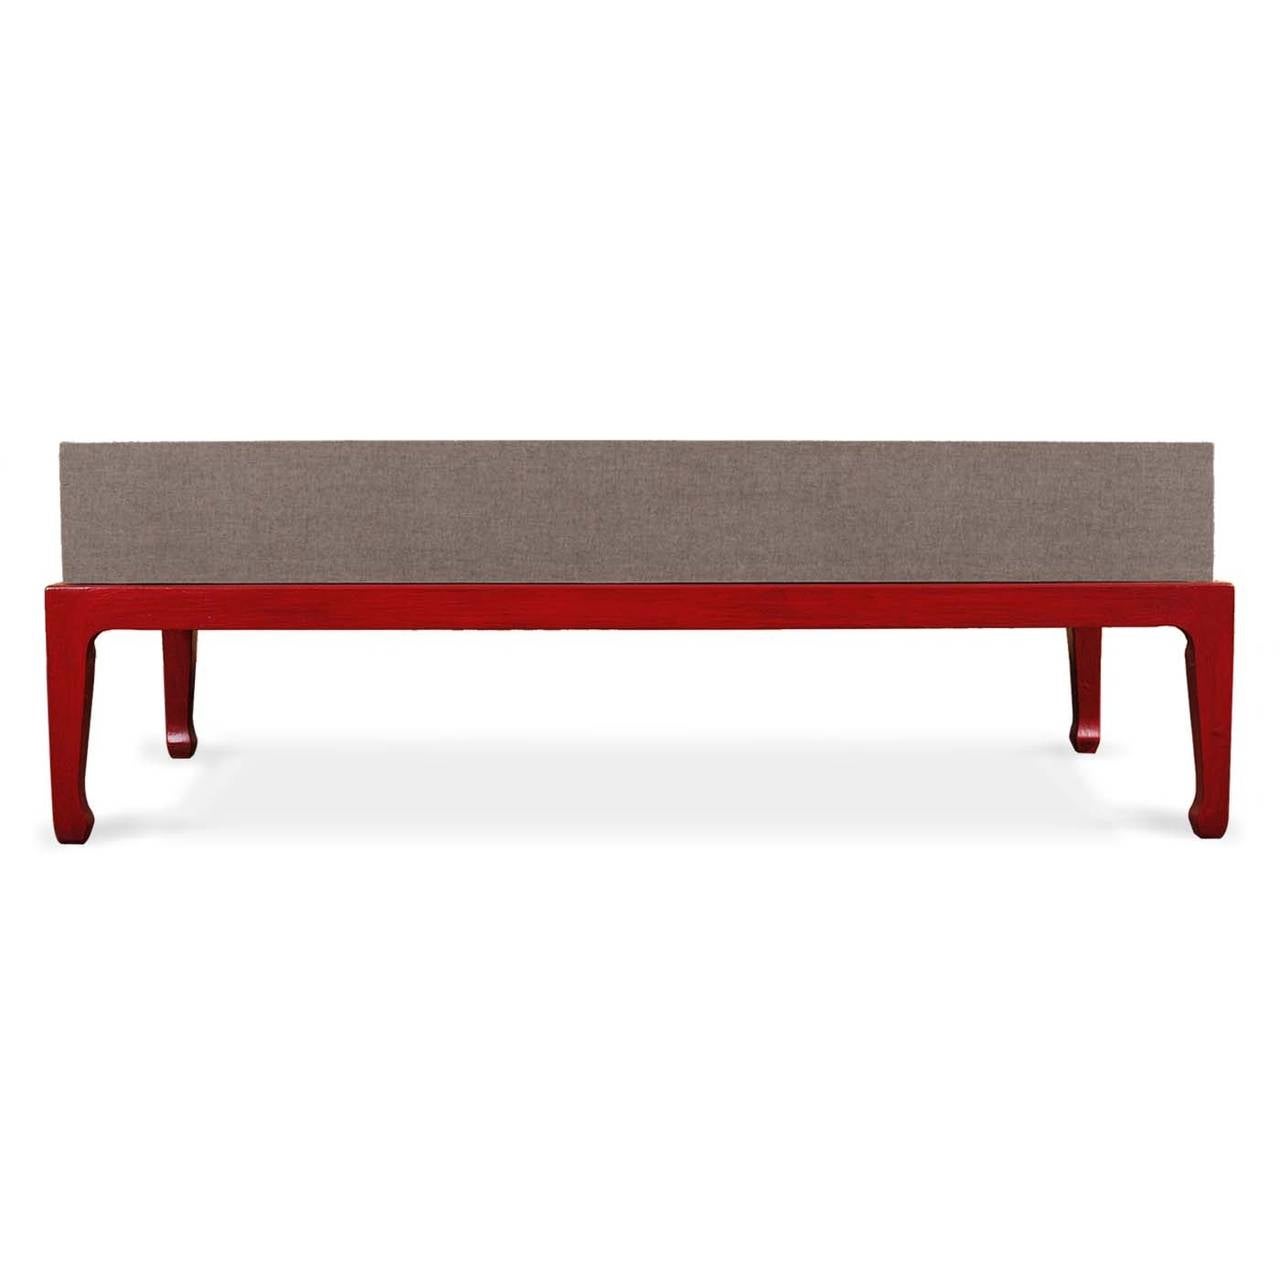 Treasure Box Coffee Table, in mixing elements we have combined a Flax Linen Lacquer Box with Chinese Red Lacquer Ming base. This interesting mix creates a fun table with 2 drawers accented with Chinese Brass hardware.
This item has limited custom